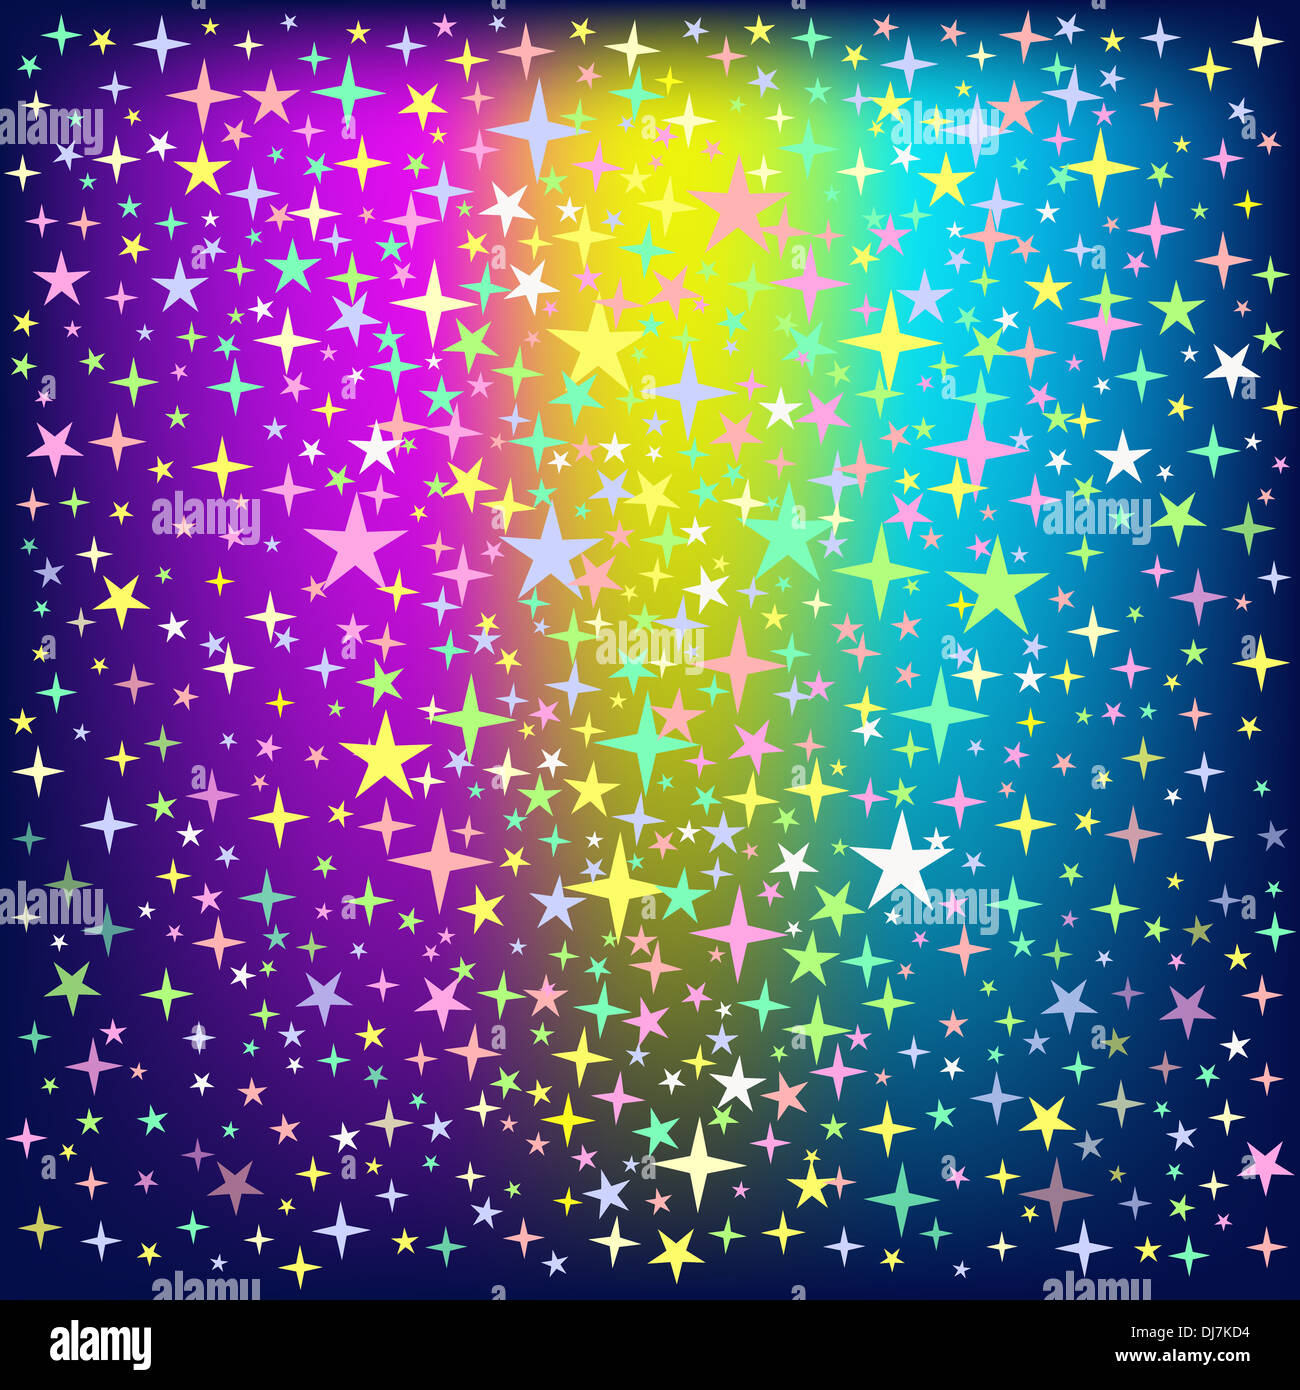 Colorful Star Rain on Glowing Background Stock Photo